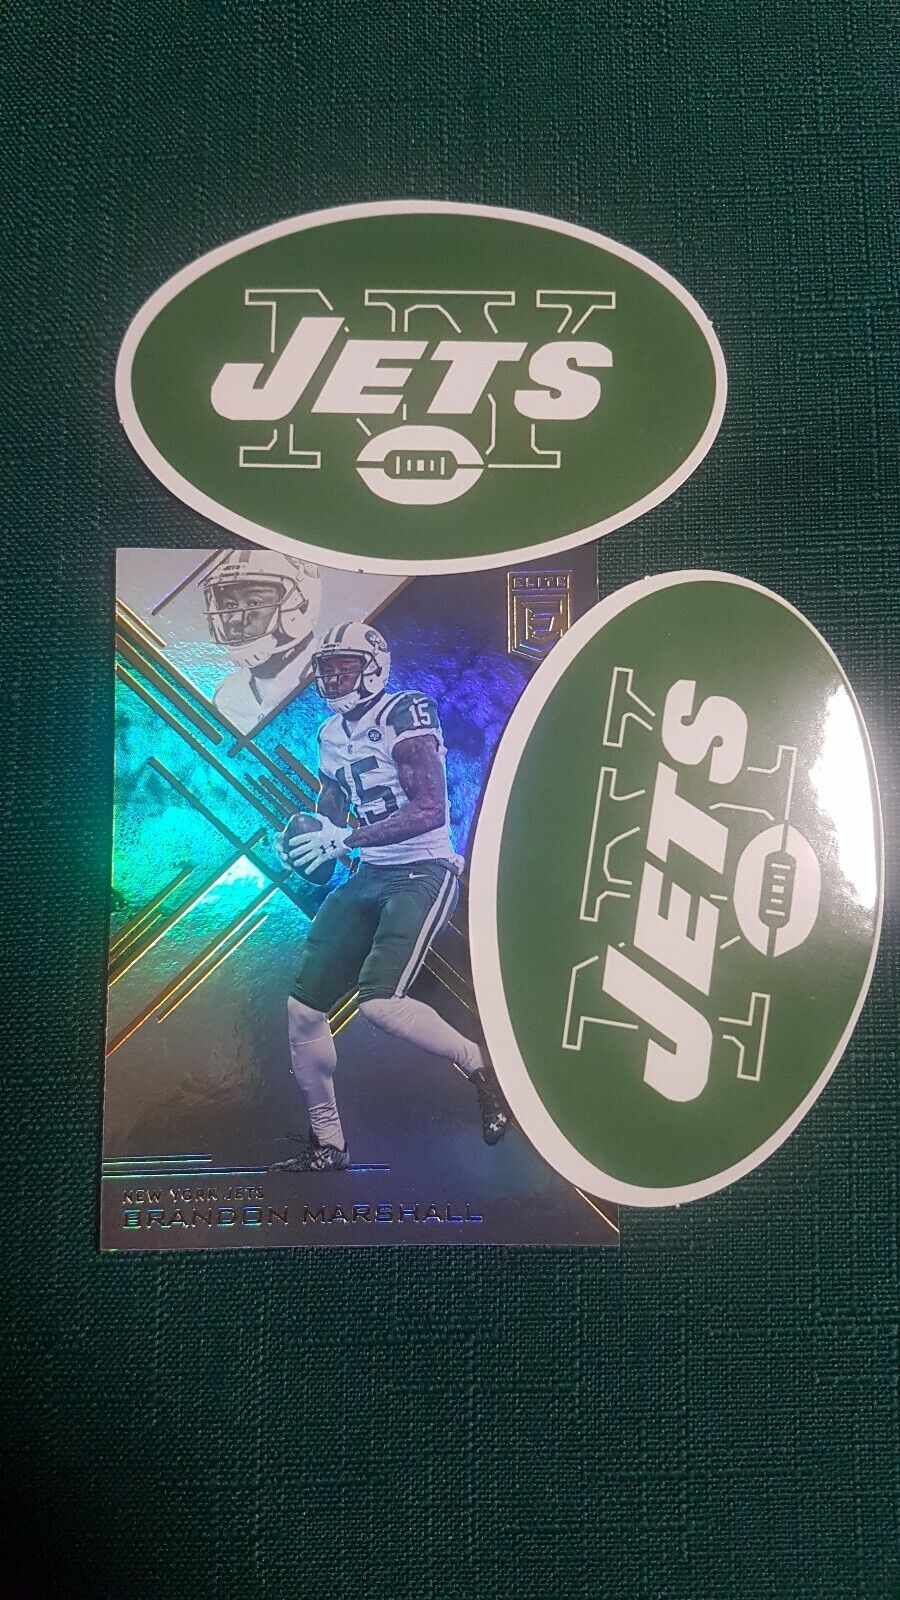 2 of New York Jets themed Car Decal Sticker quality NFL collectable 